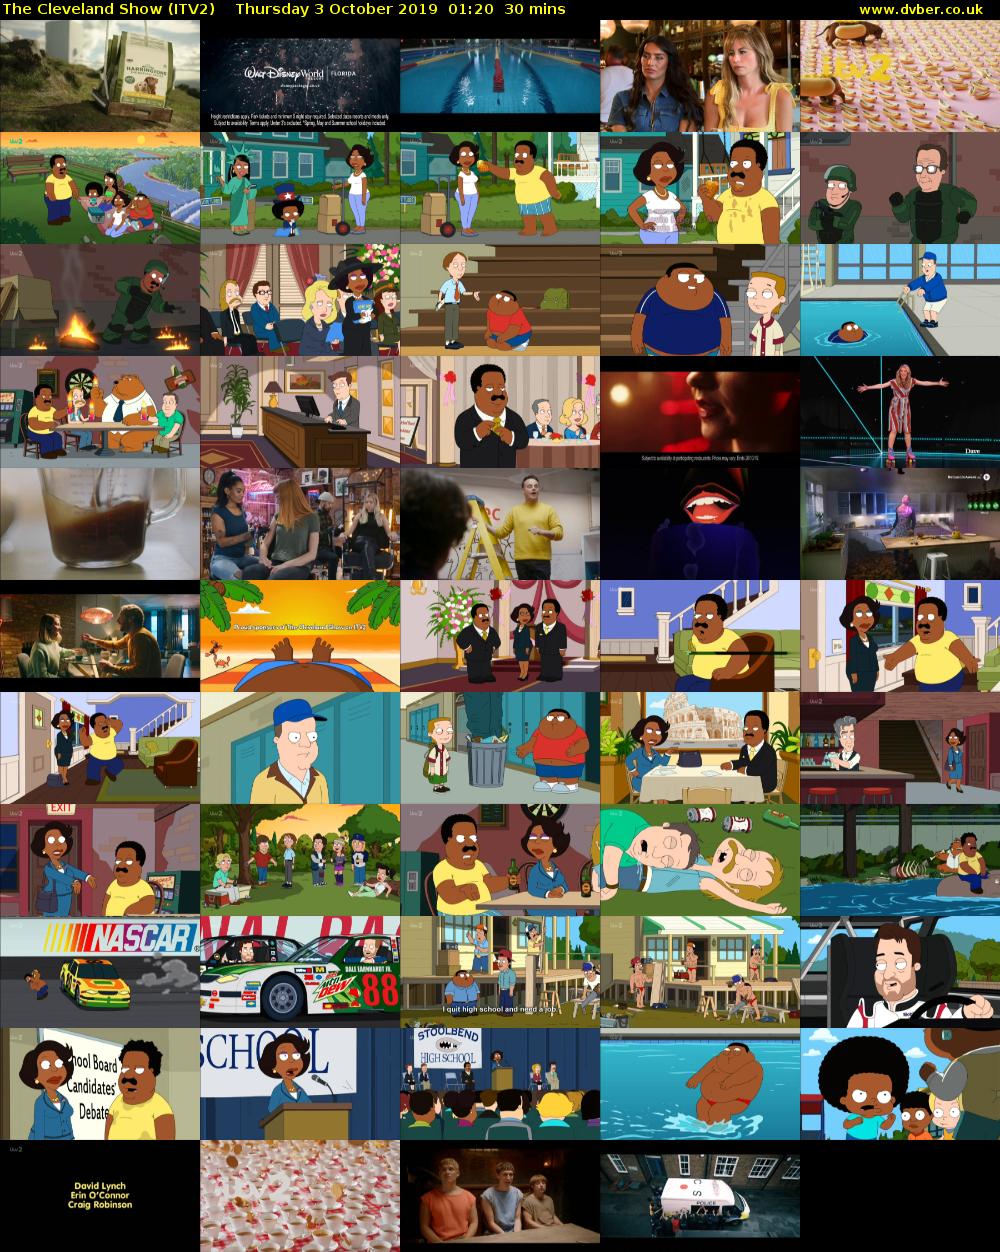 The Cleveland Show (ITV2) Thursday 3 October 2019 01:20 - 01:50